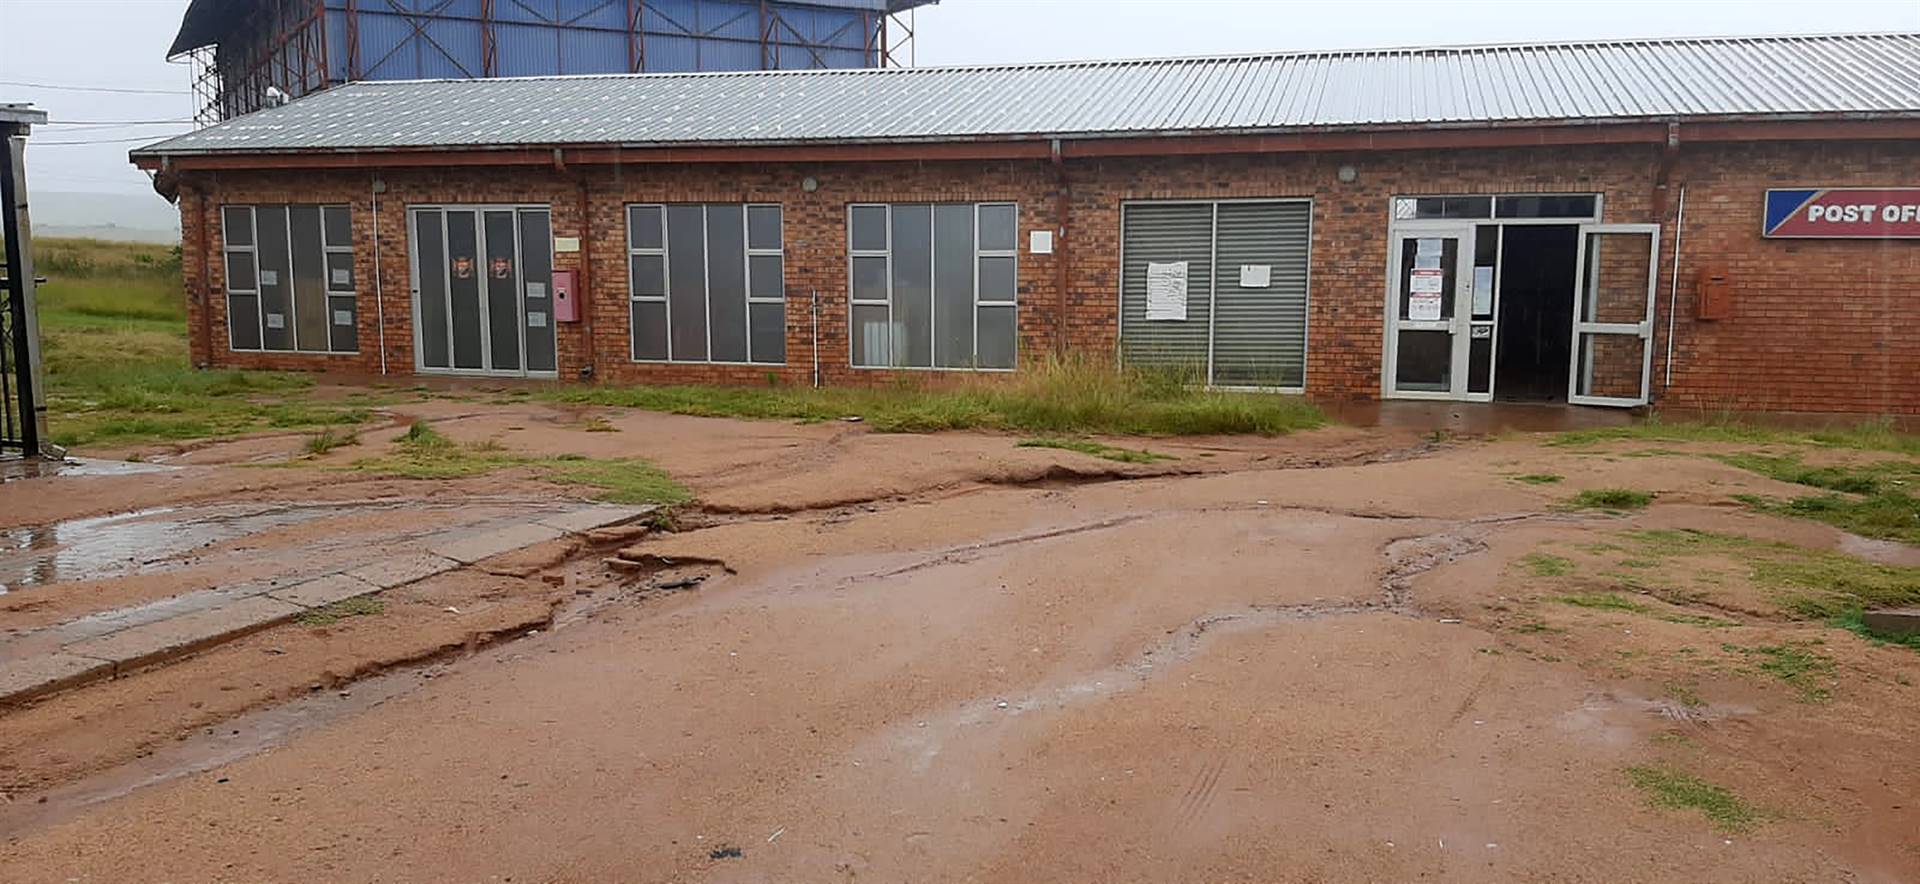 The Verena Post Office, where thugs exchanged fire with security guards.         Photo by Bongani Mthimunye